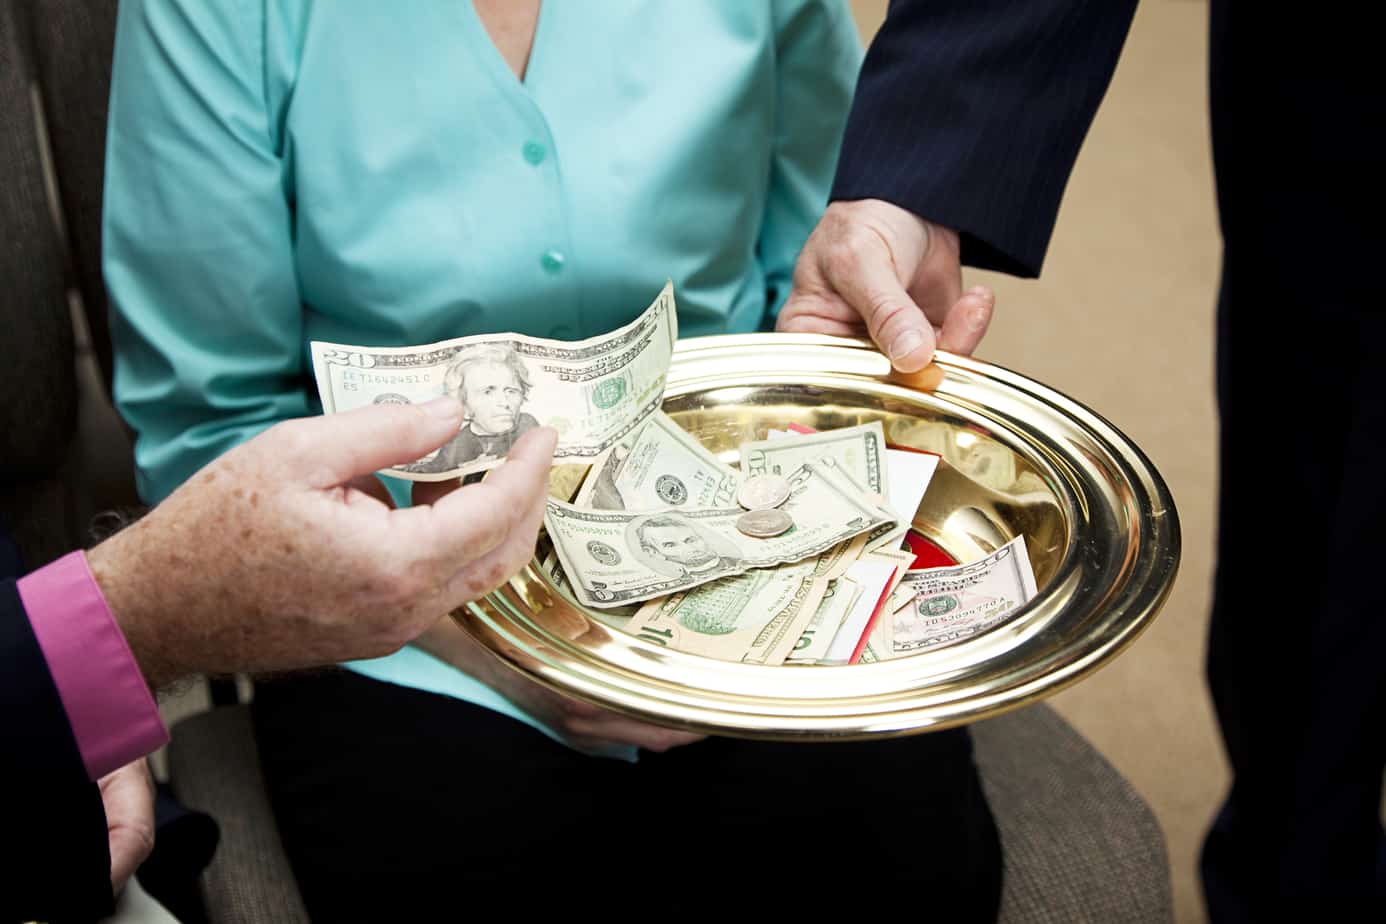 Why Churches Ask For Money? – 7 Truthful Reasons